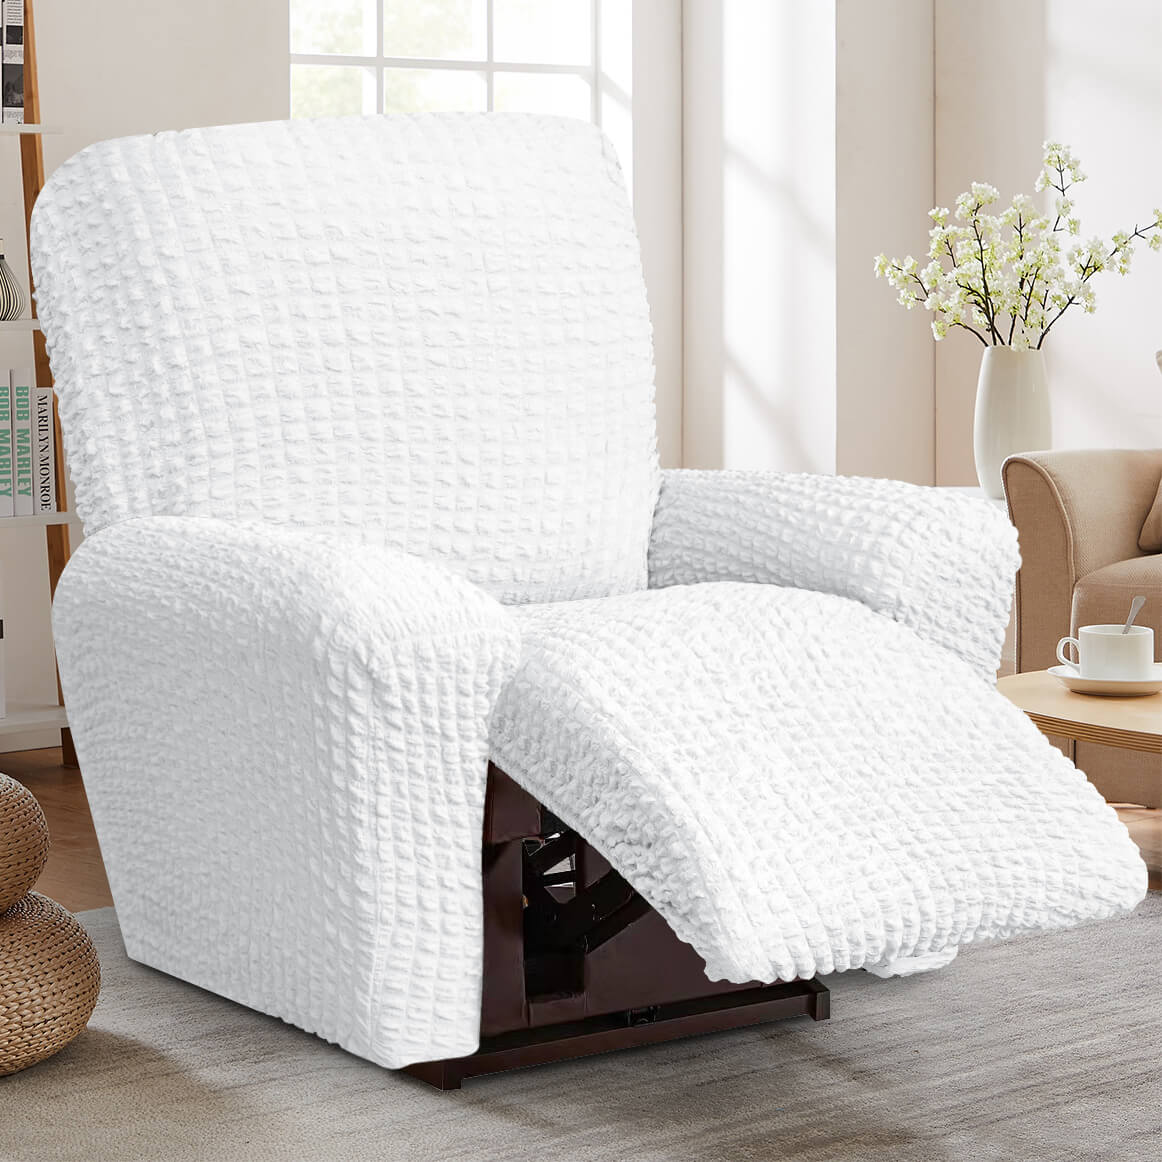 Crfatop High Quality Recliner Seater Cover Seersucker Fabric Reclining Couch Cover ChairWhite